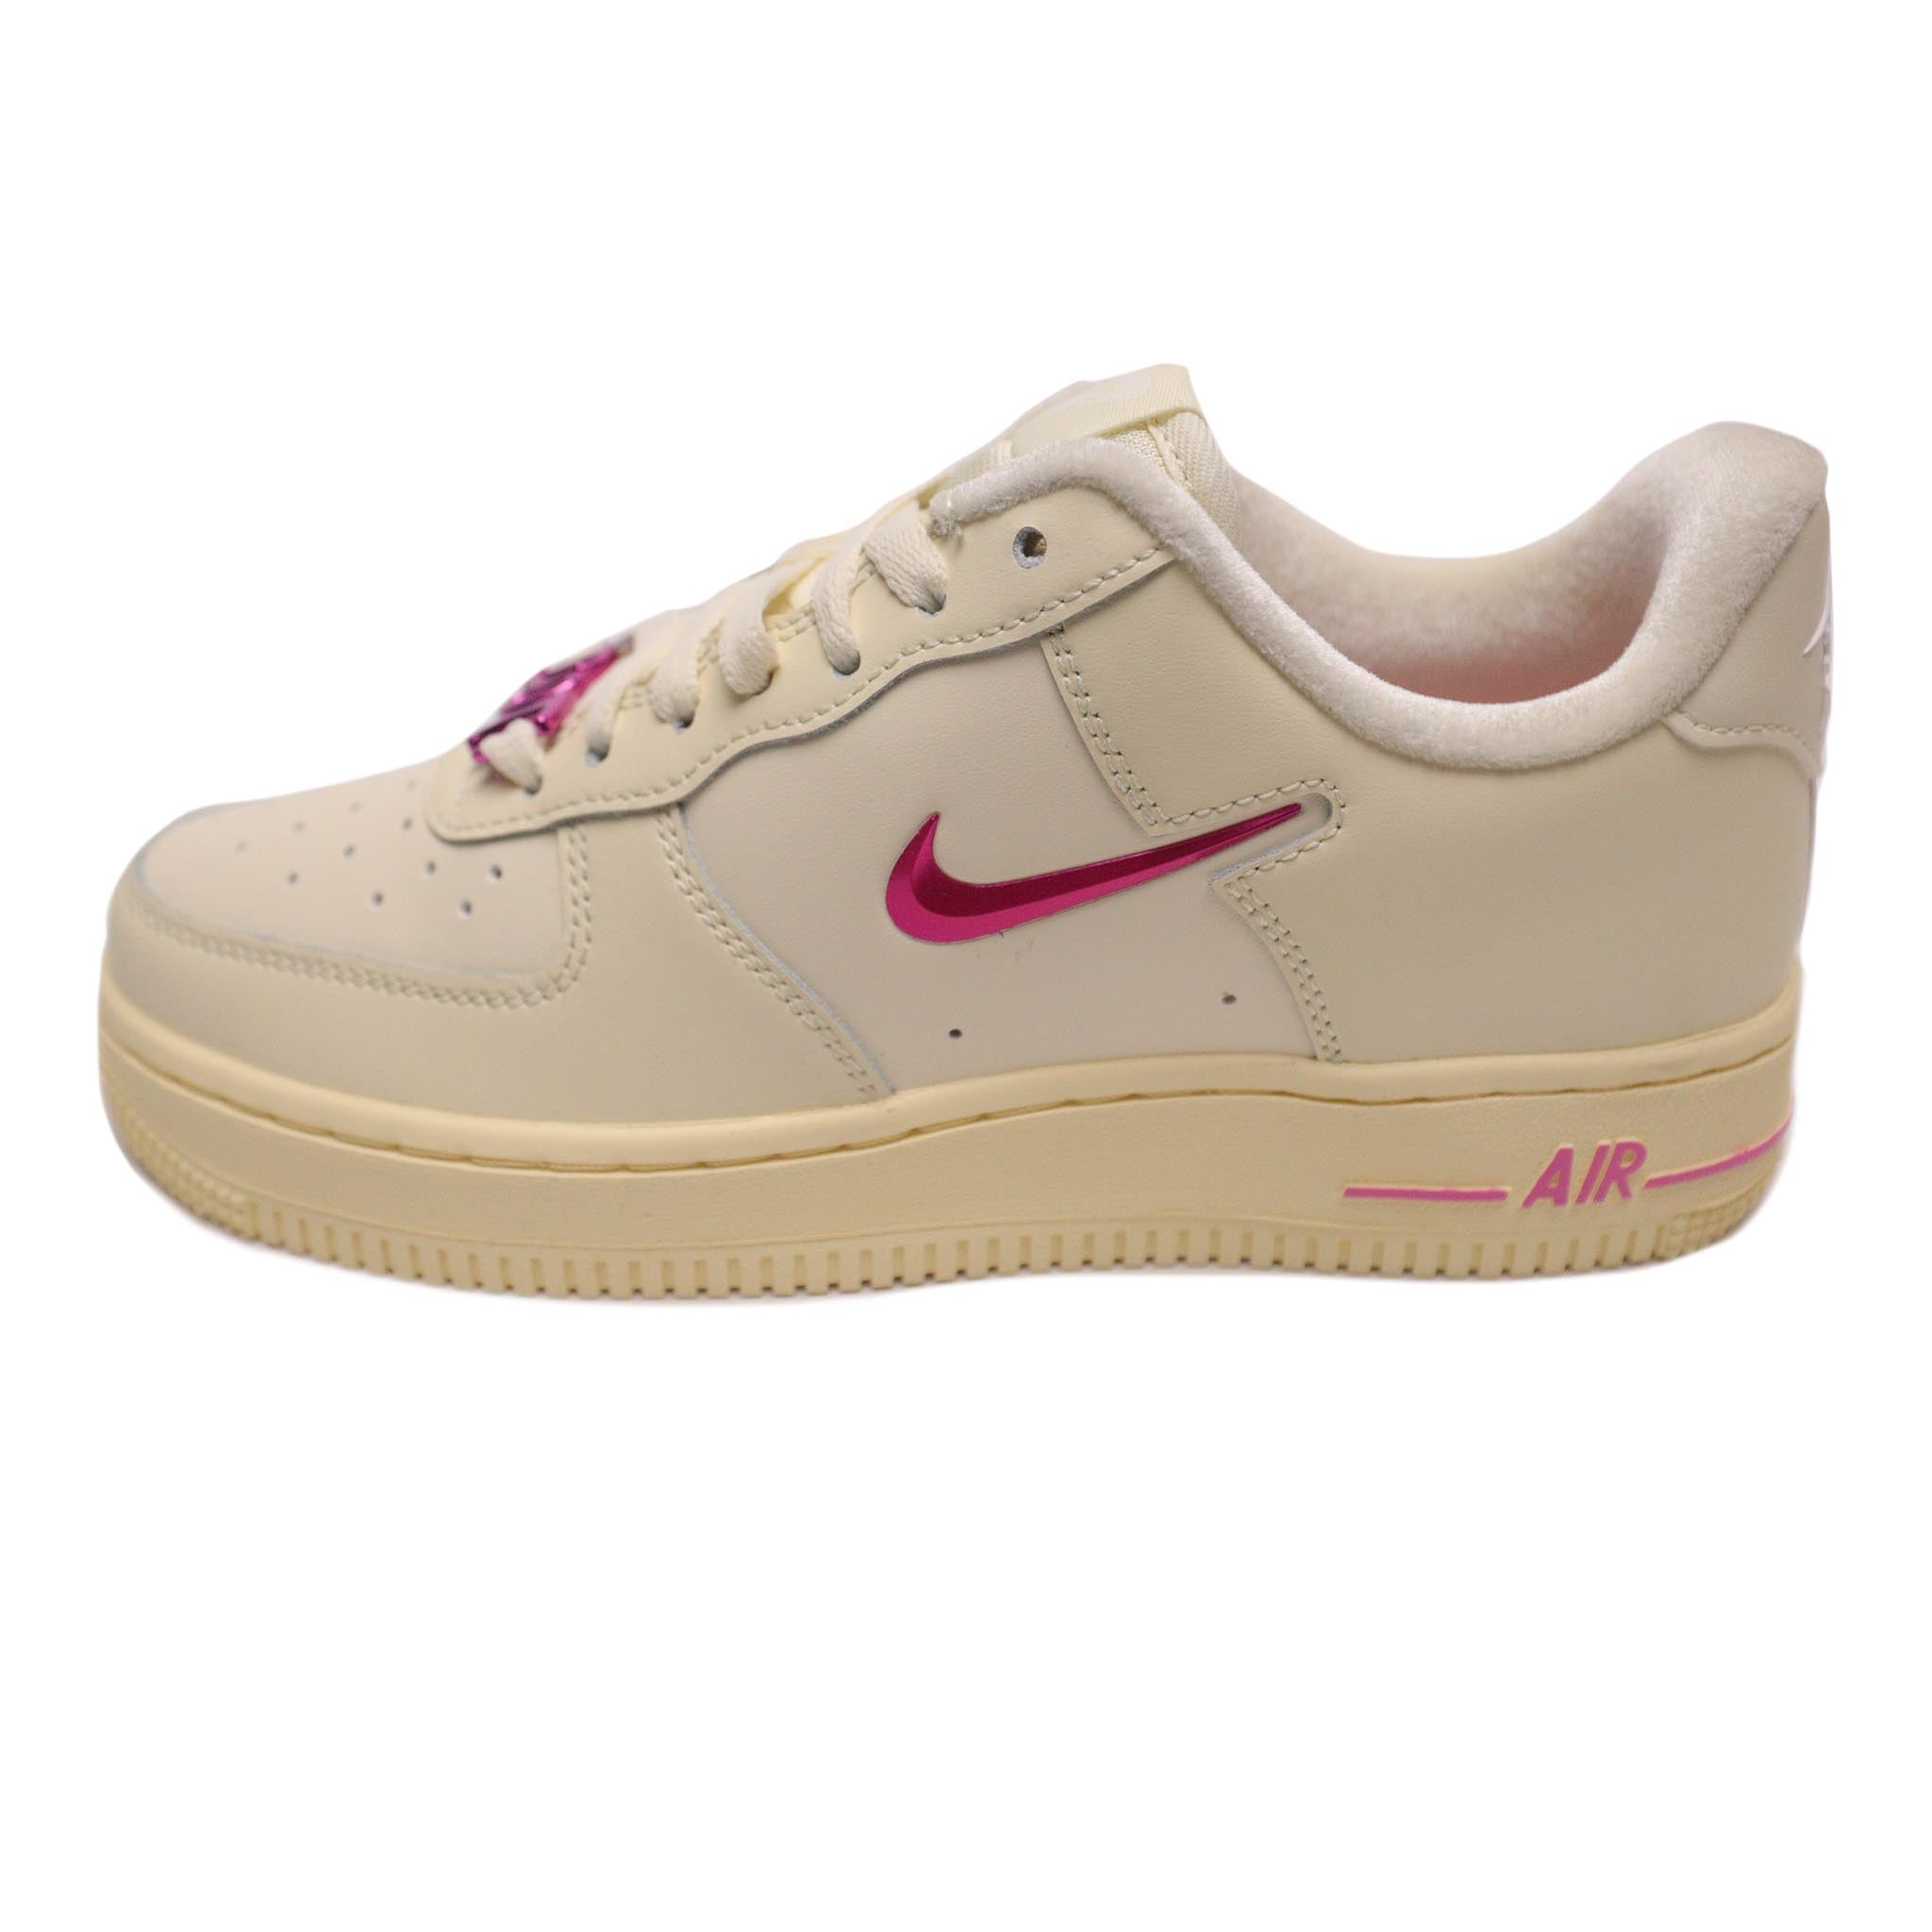 Nike Air Force 1 '07 SE 'Just Do It' Coconut Milk/Playful Pink